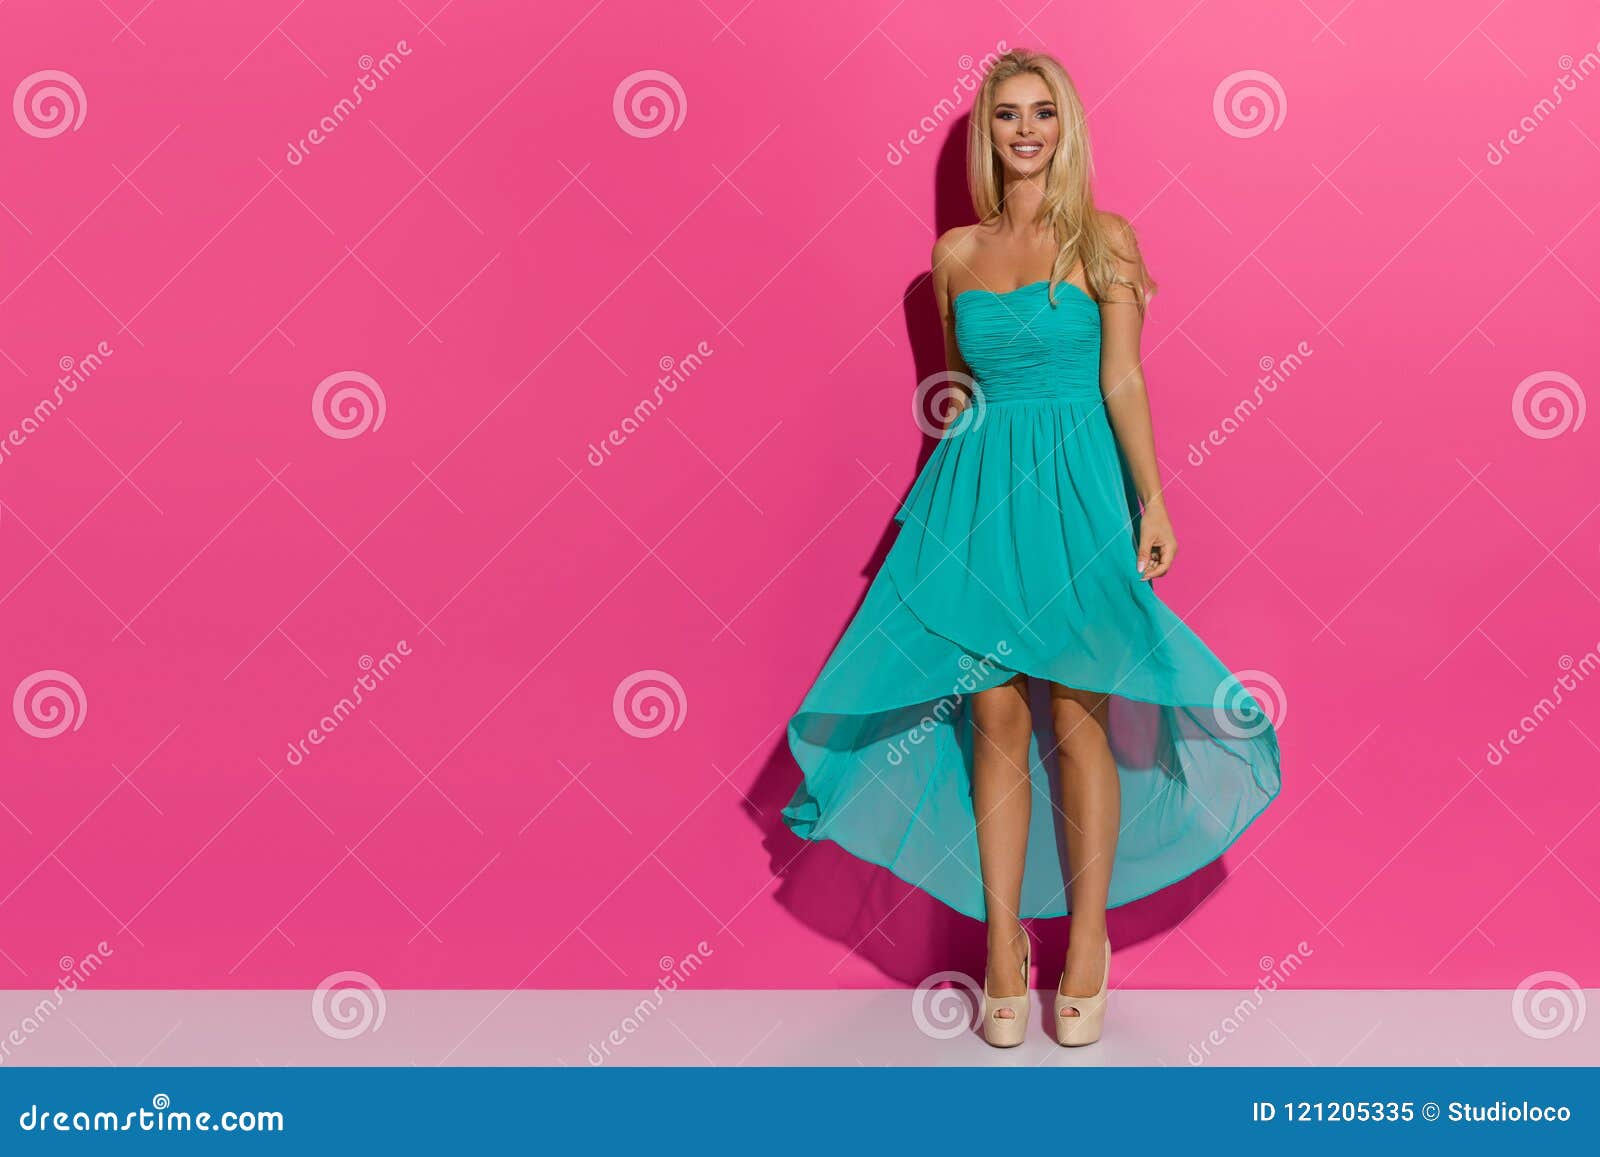 Turquoise Dress and Blonde Hair Outfit - wide 6